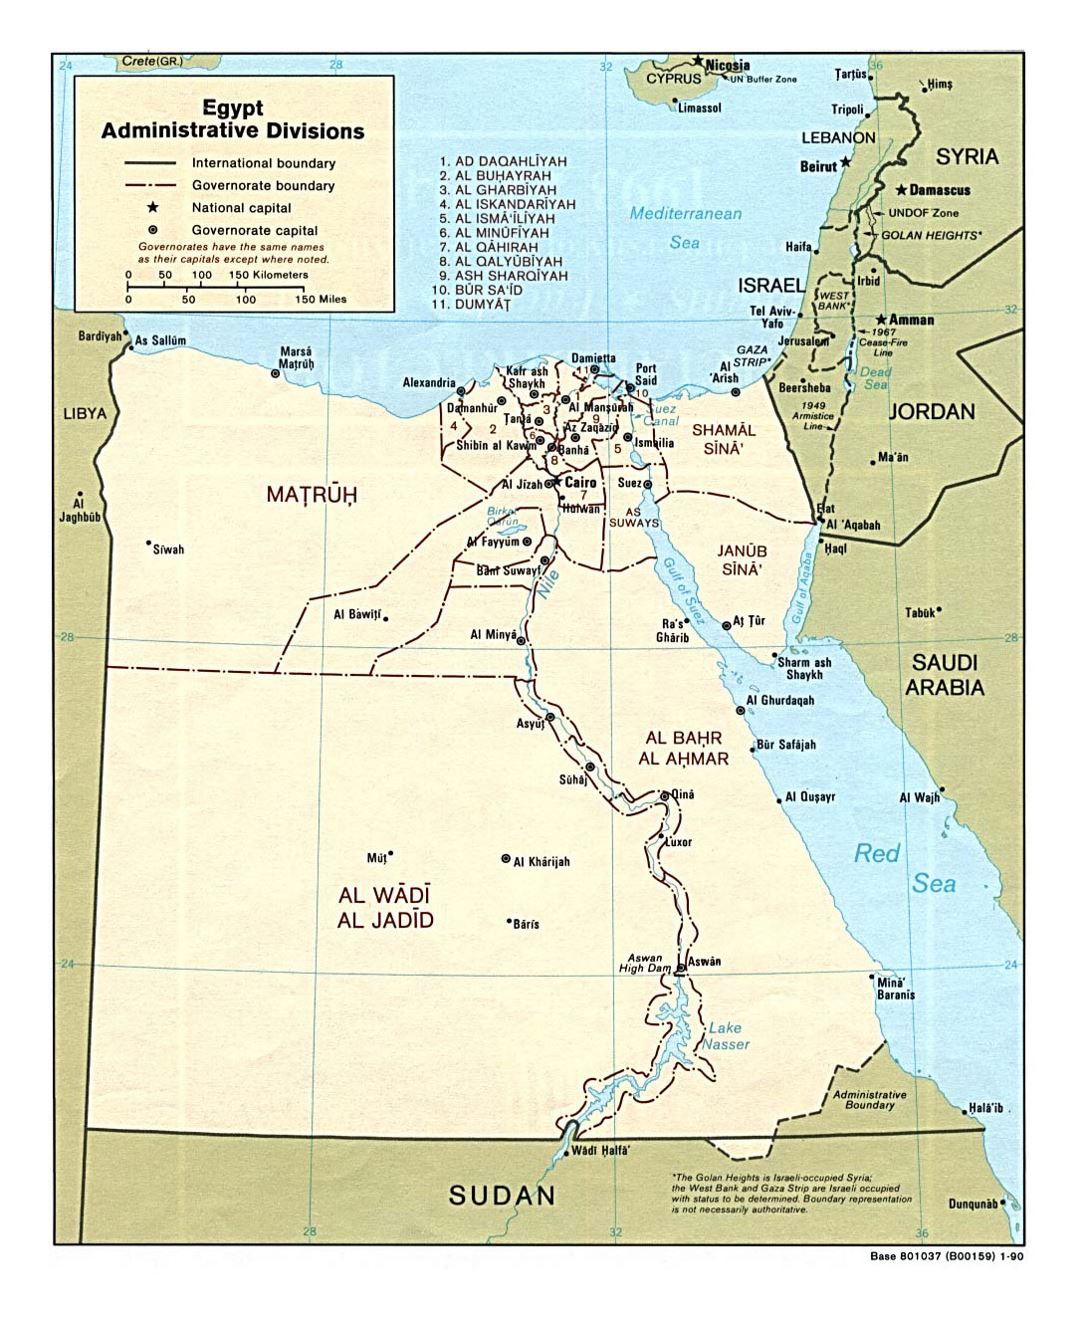 Detailed administrative divisions map of Egypt - 1990